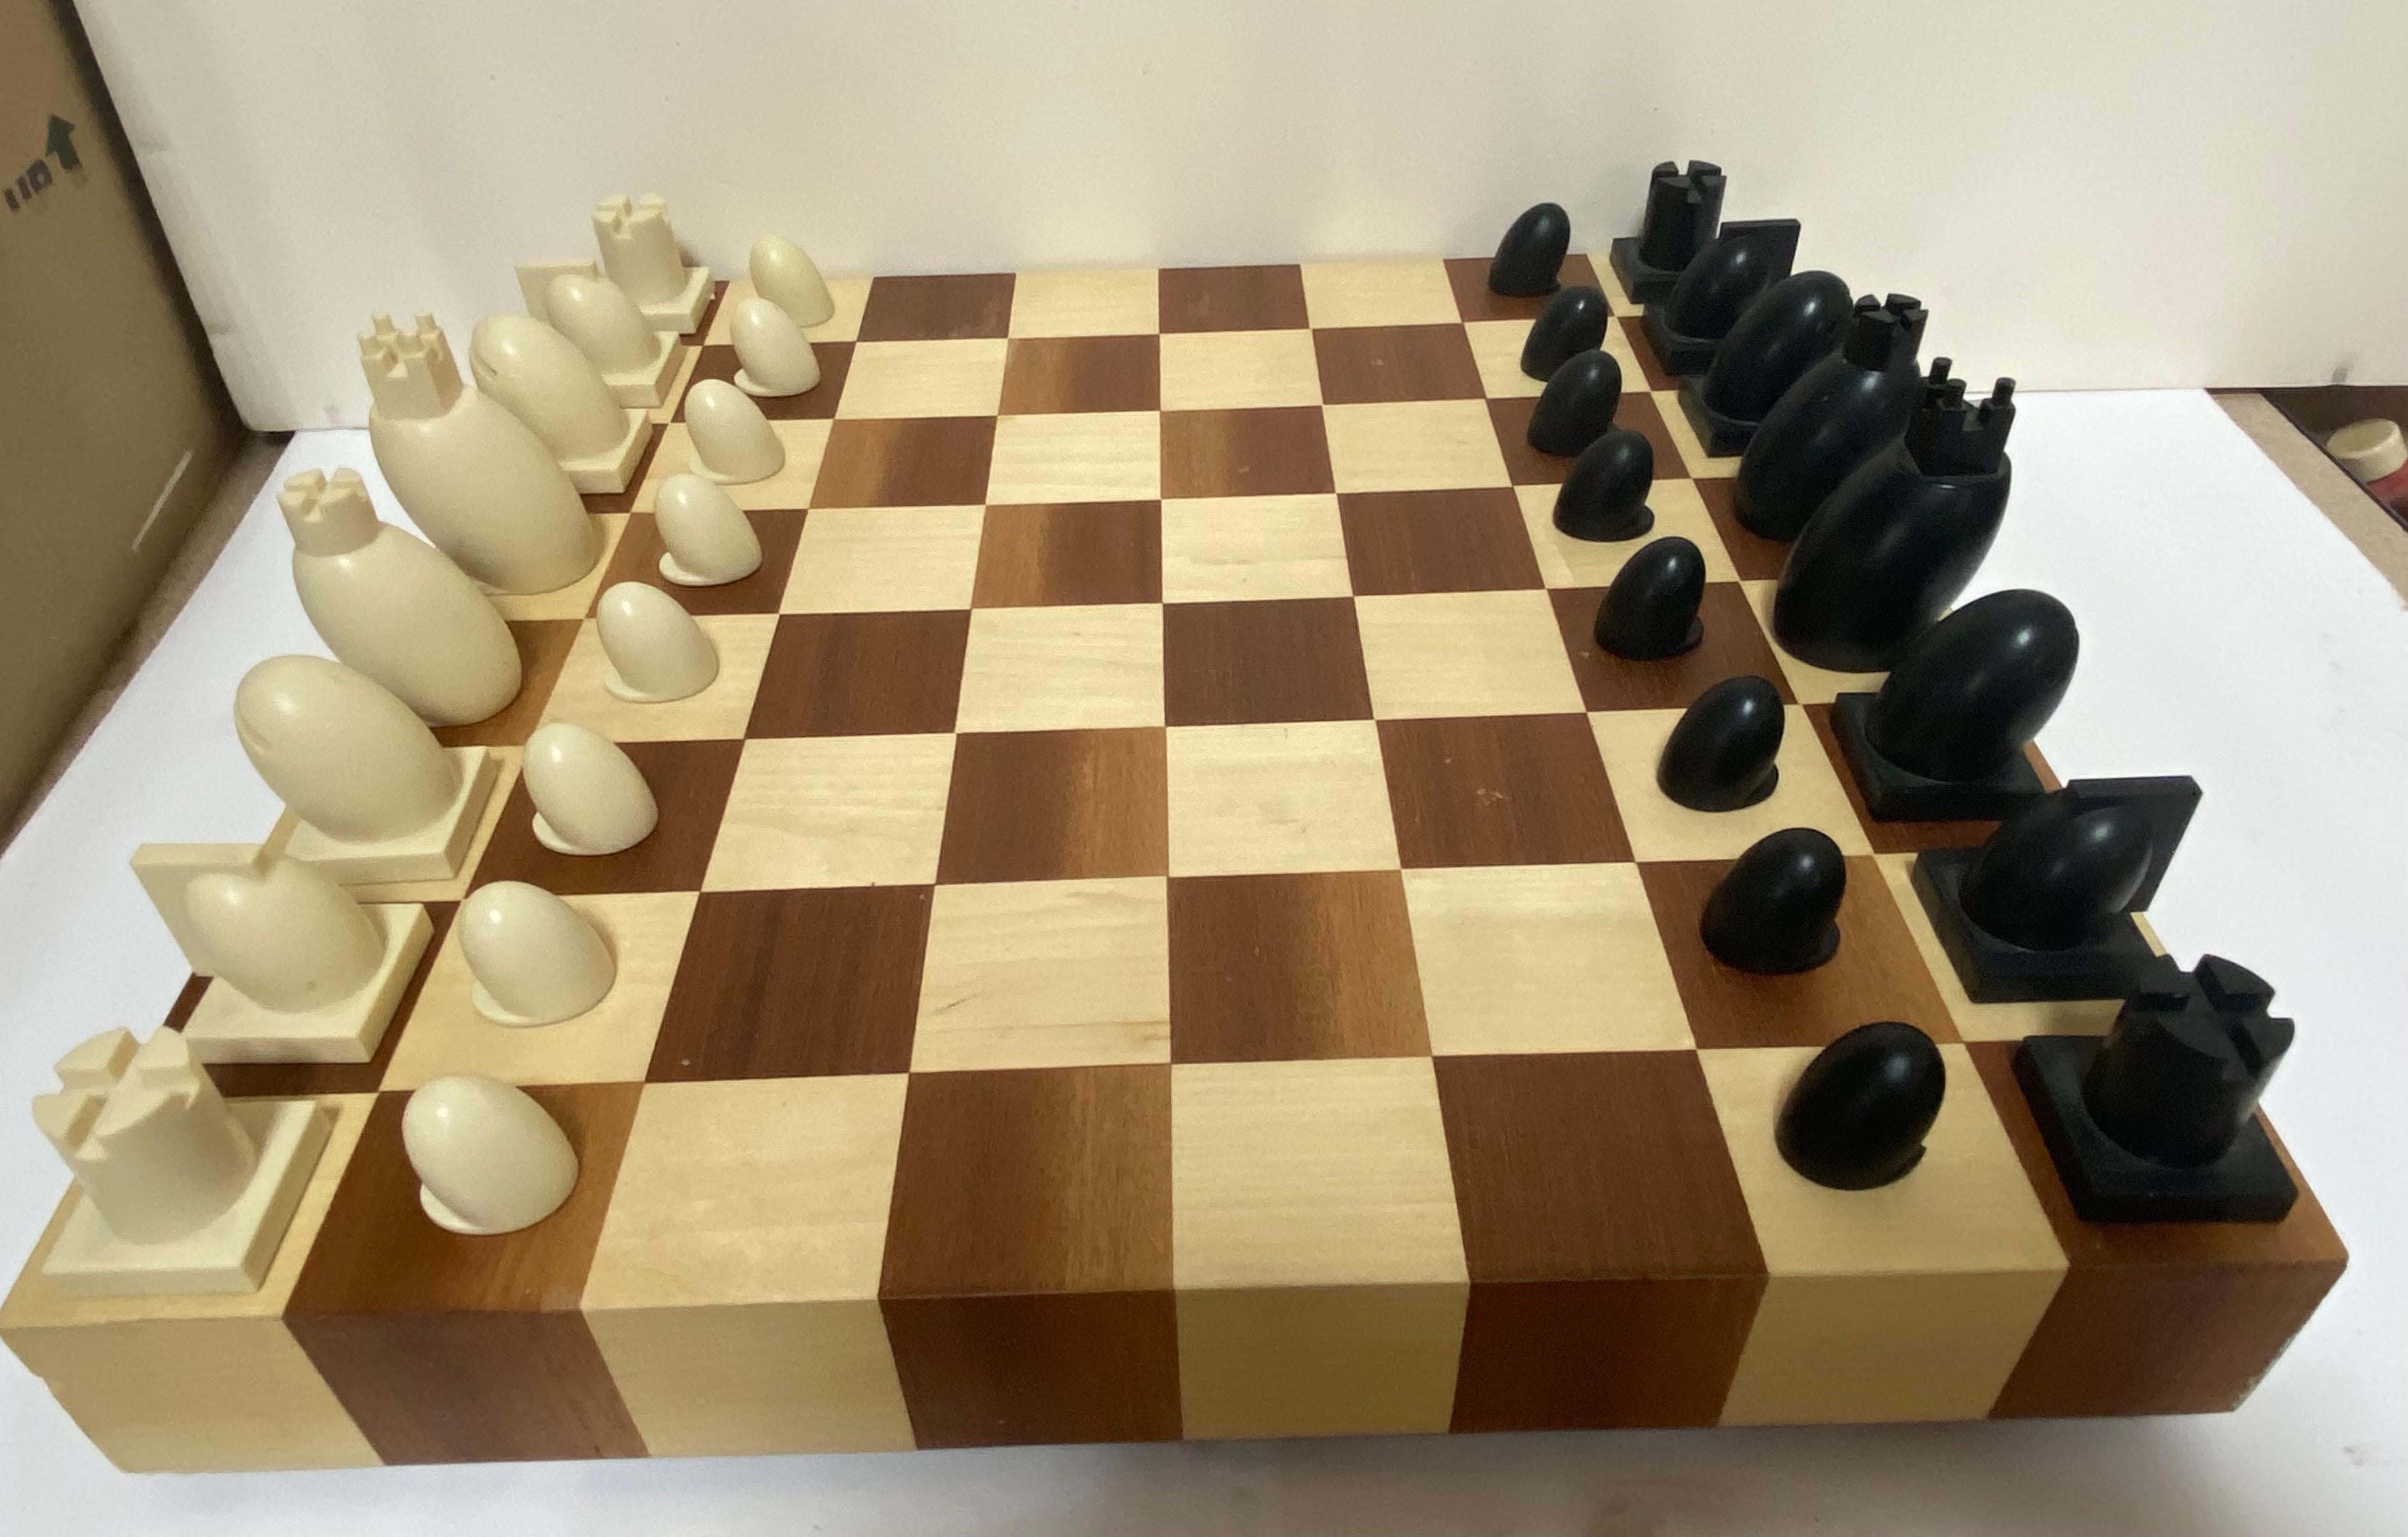 A carved wood chess and checkers set with board and box by famed architect Michael Graves. Chess board is two-toned wood and signed; each chess and pawn piece is signed Graves; USA, circa 2000.

Features resin chess and pawn pieces in faux ebony